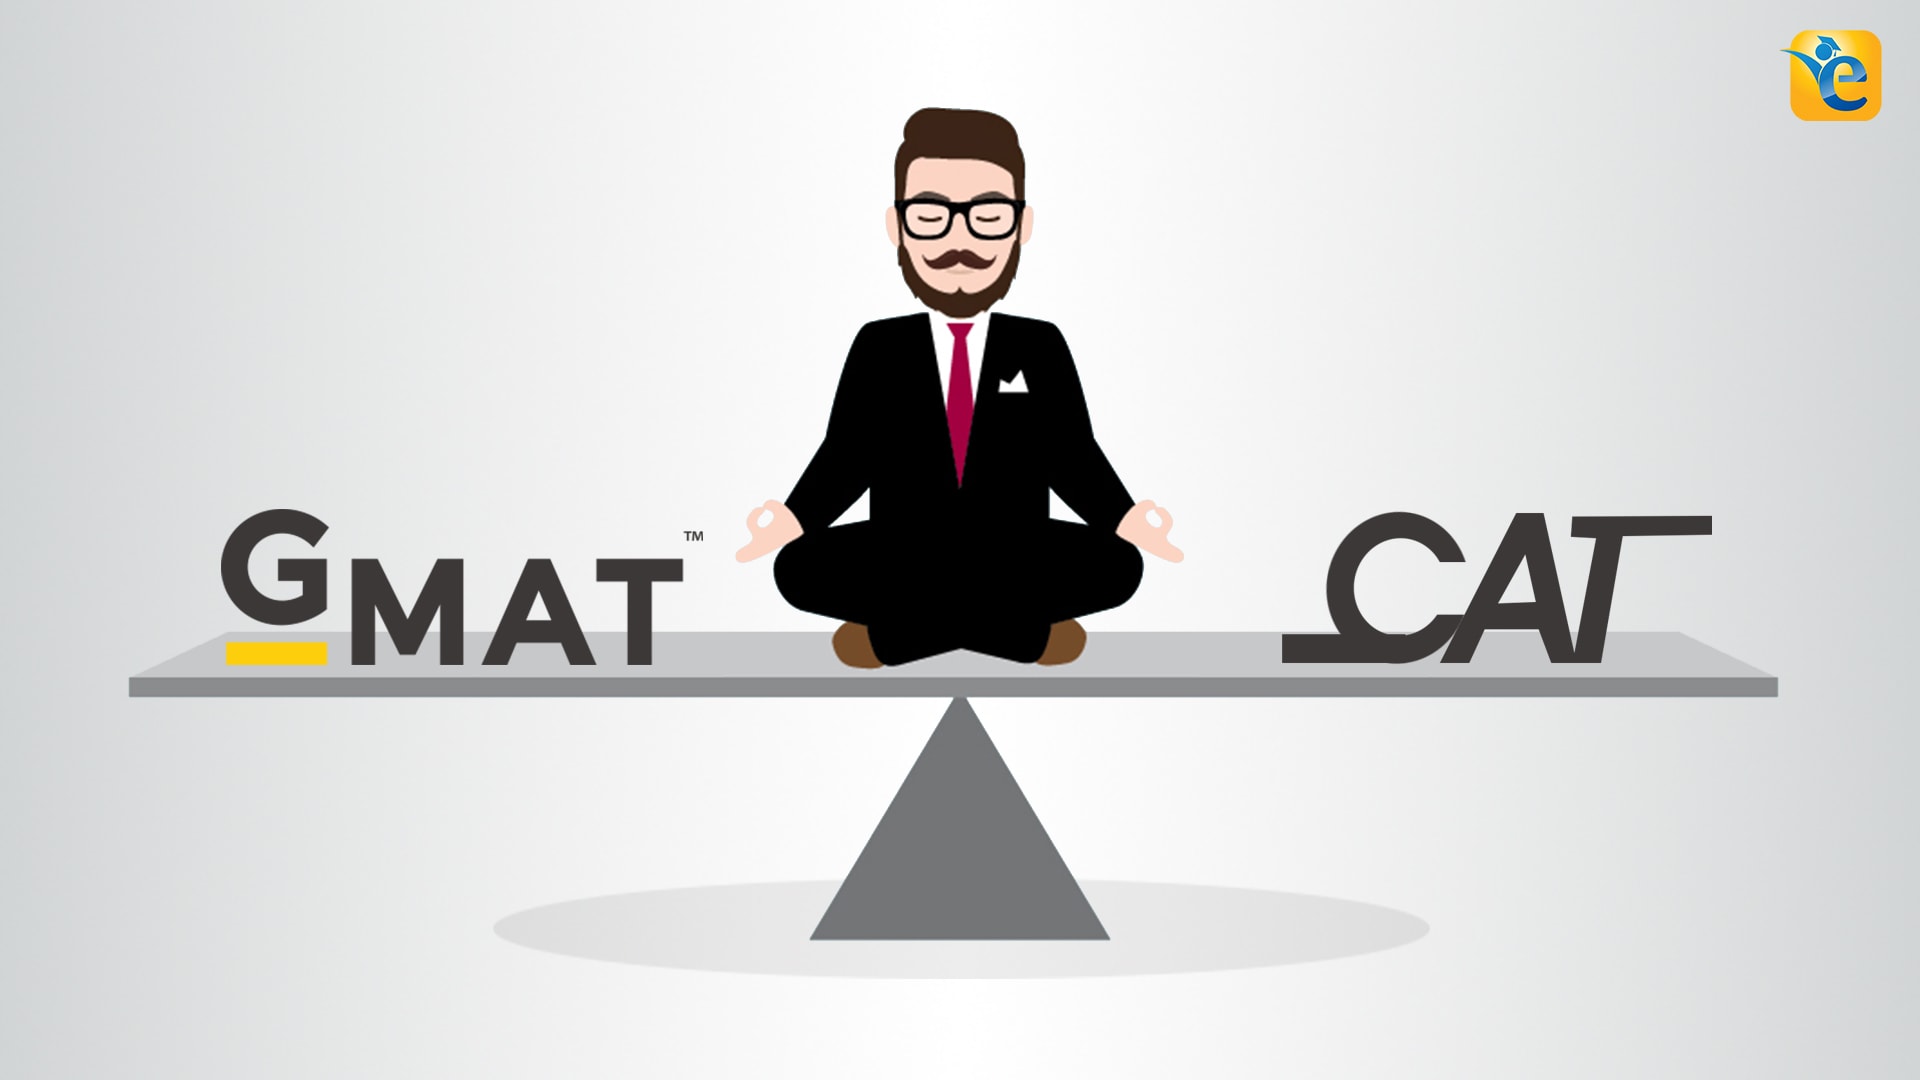 GMAT vs CAT differences